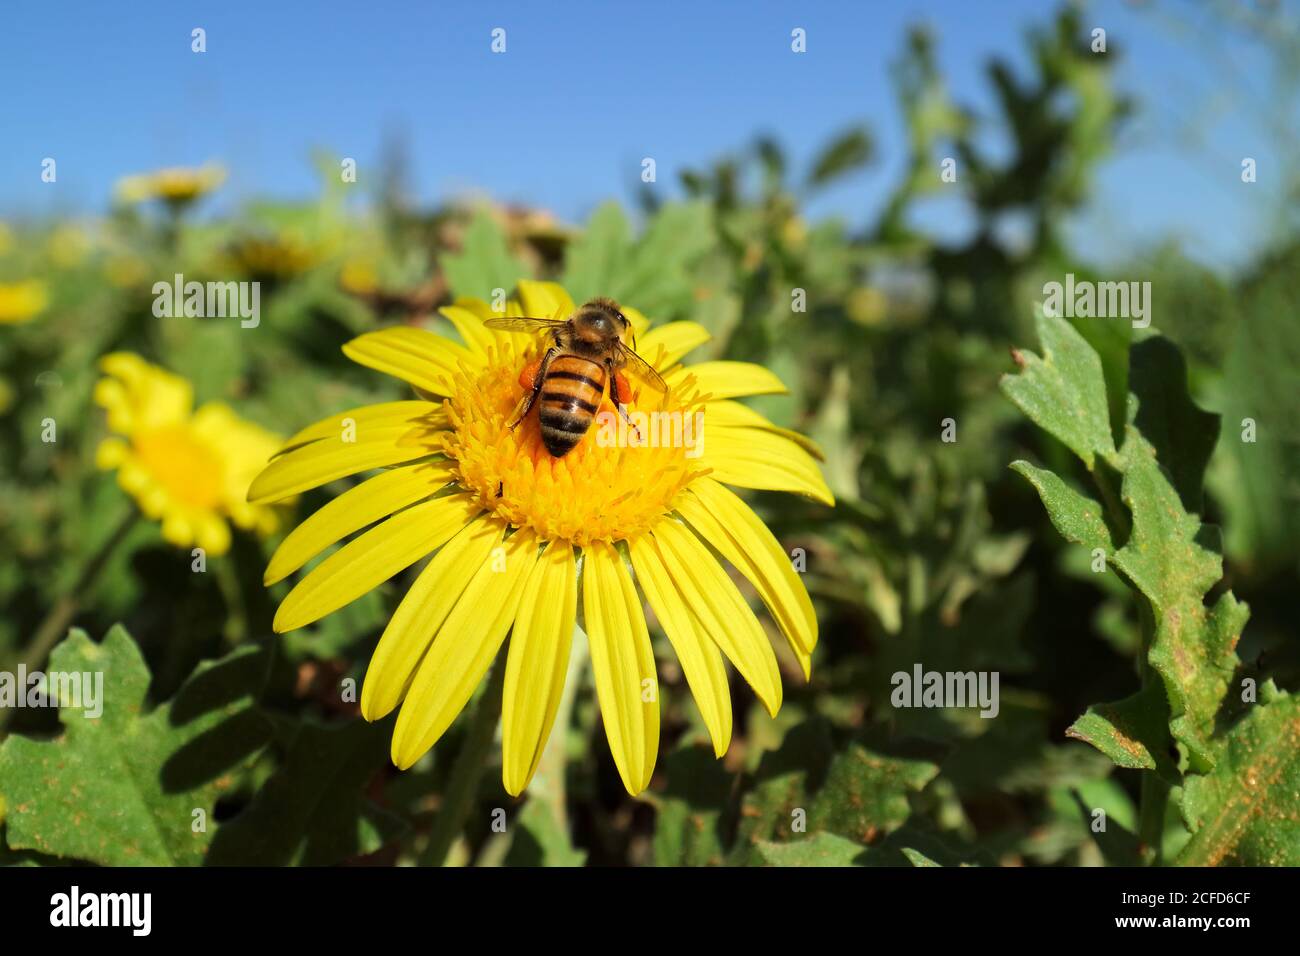 A honey bee collecting nectar on a brightly colored yellow flower Stock Photo